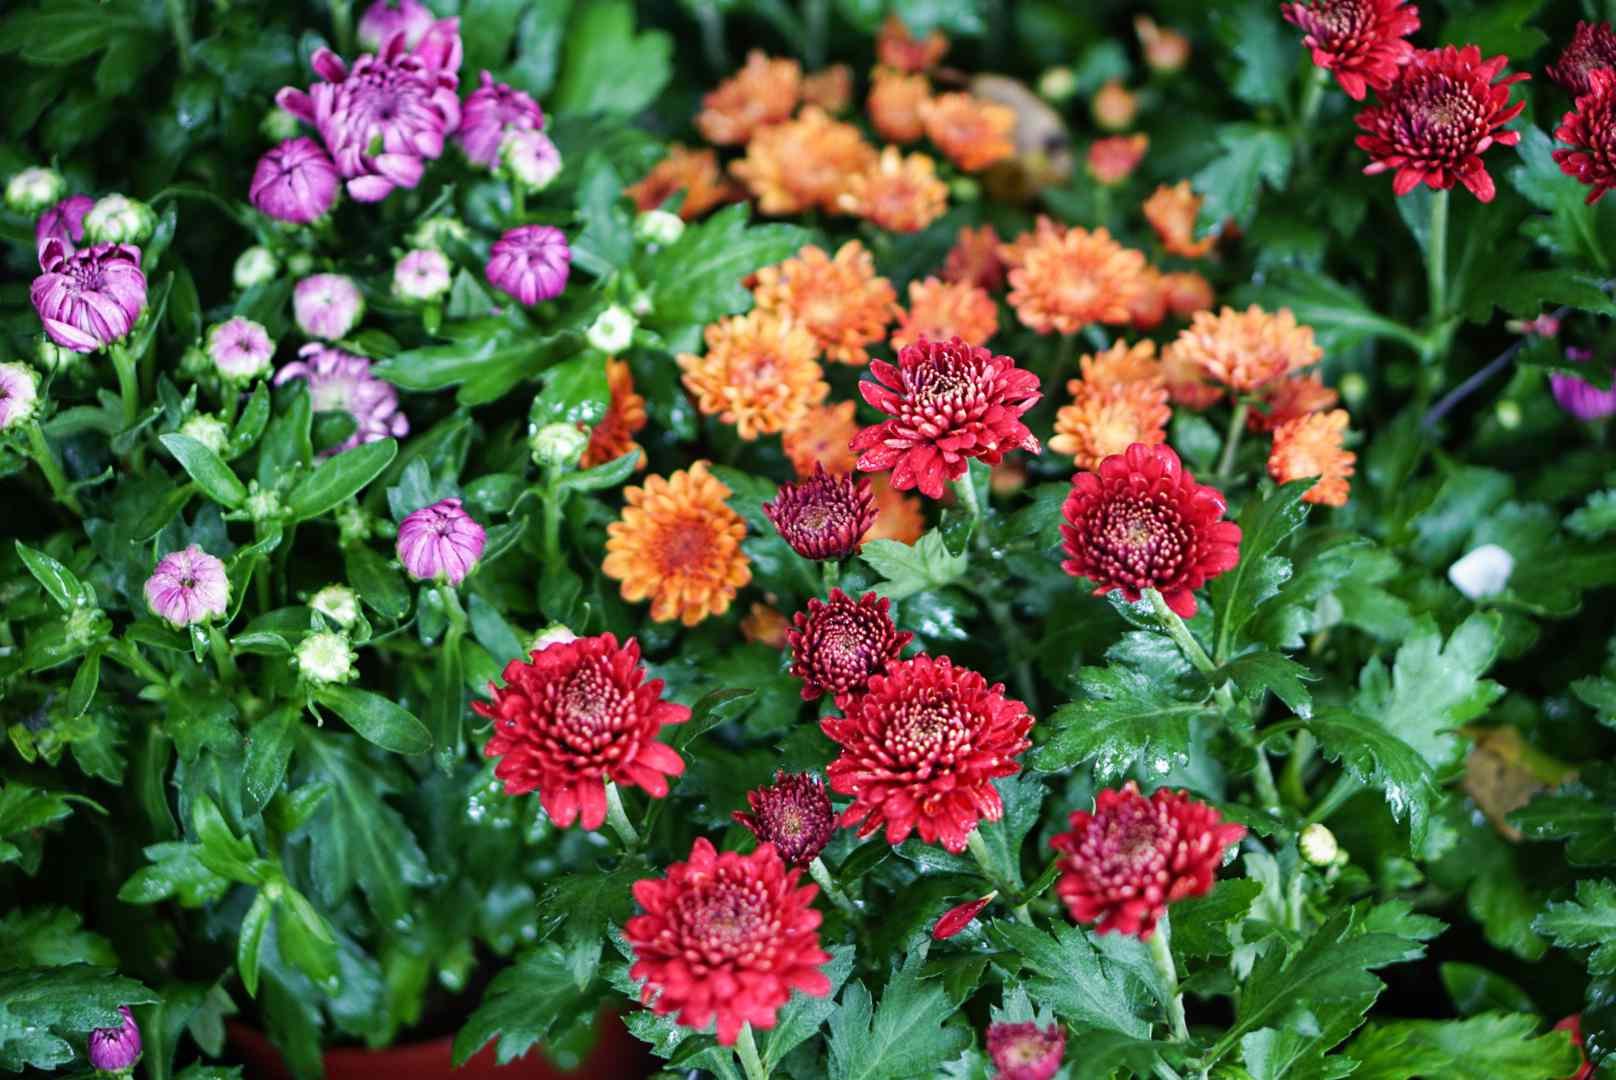 How to Grow Hardy Mums for Blooms Year After Year